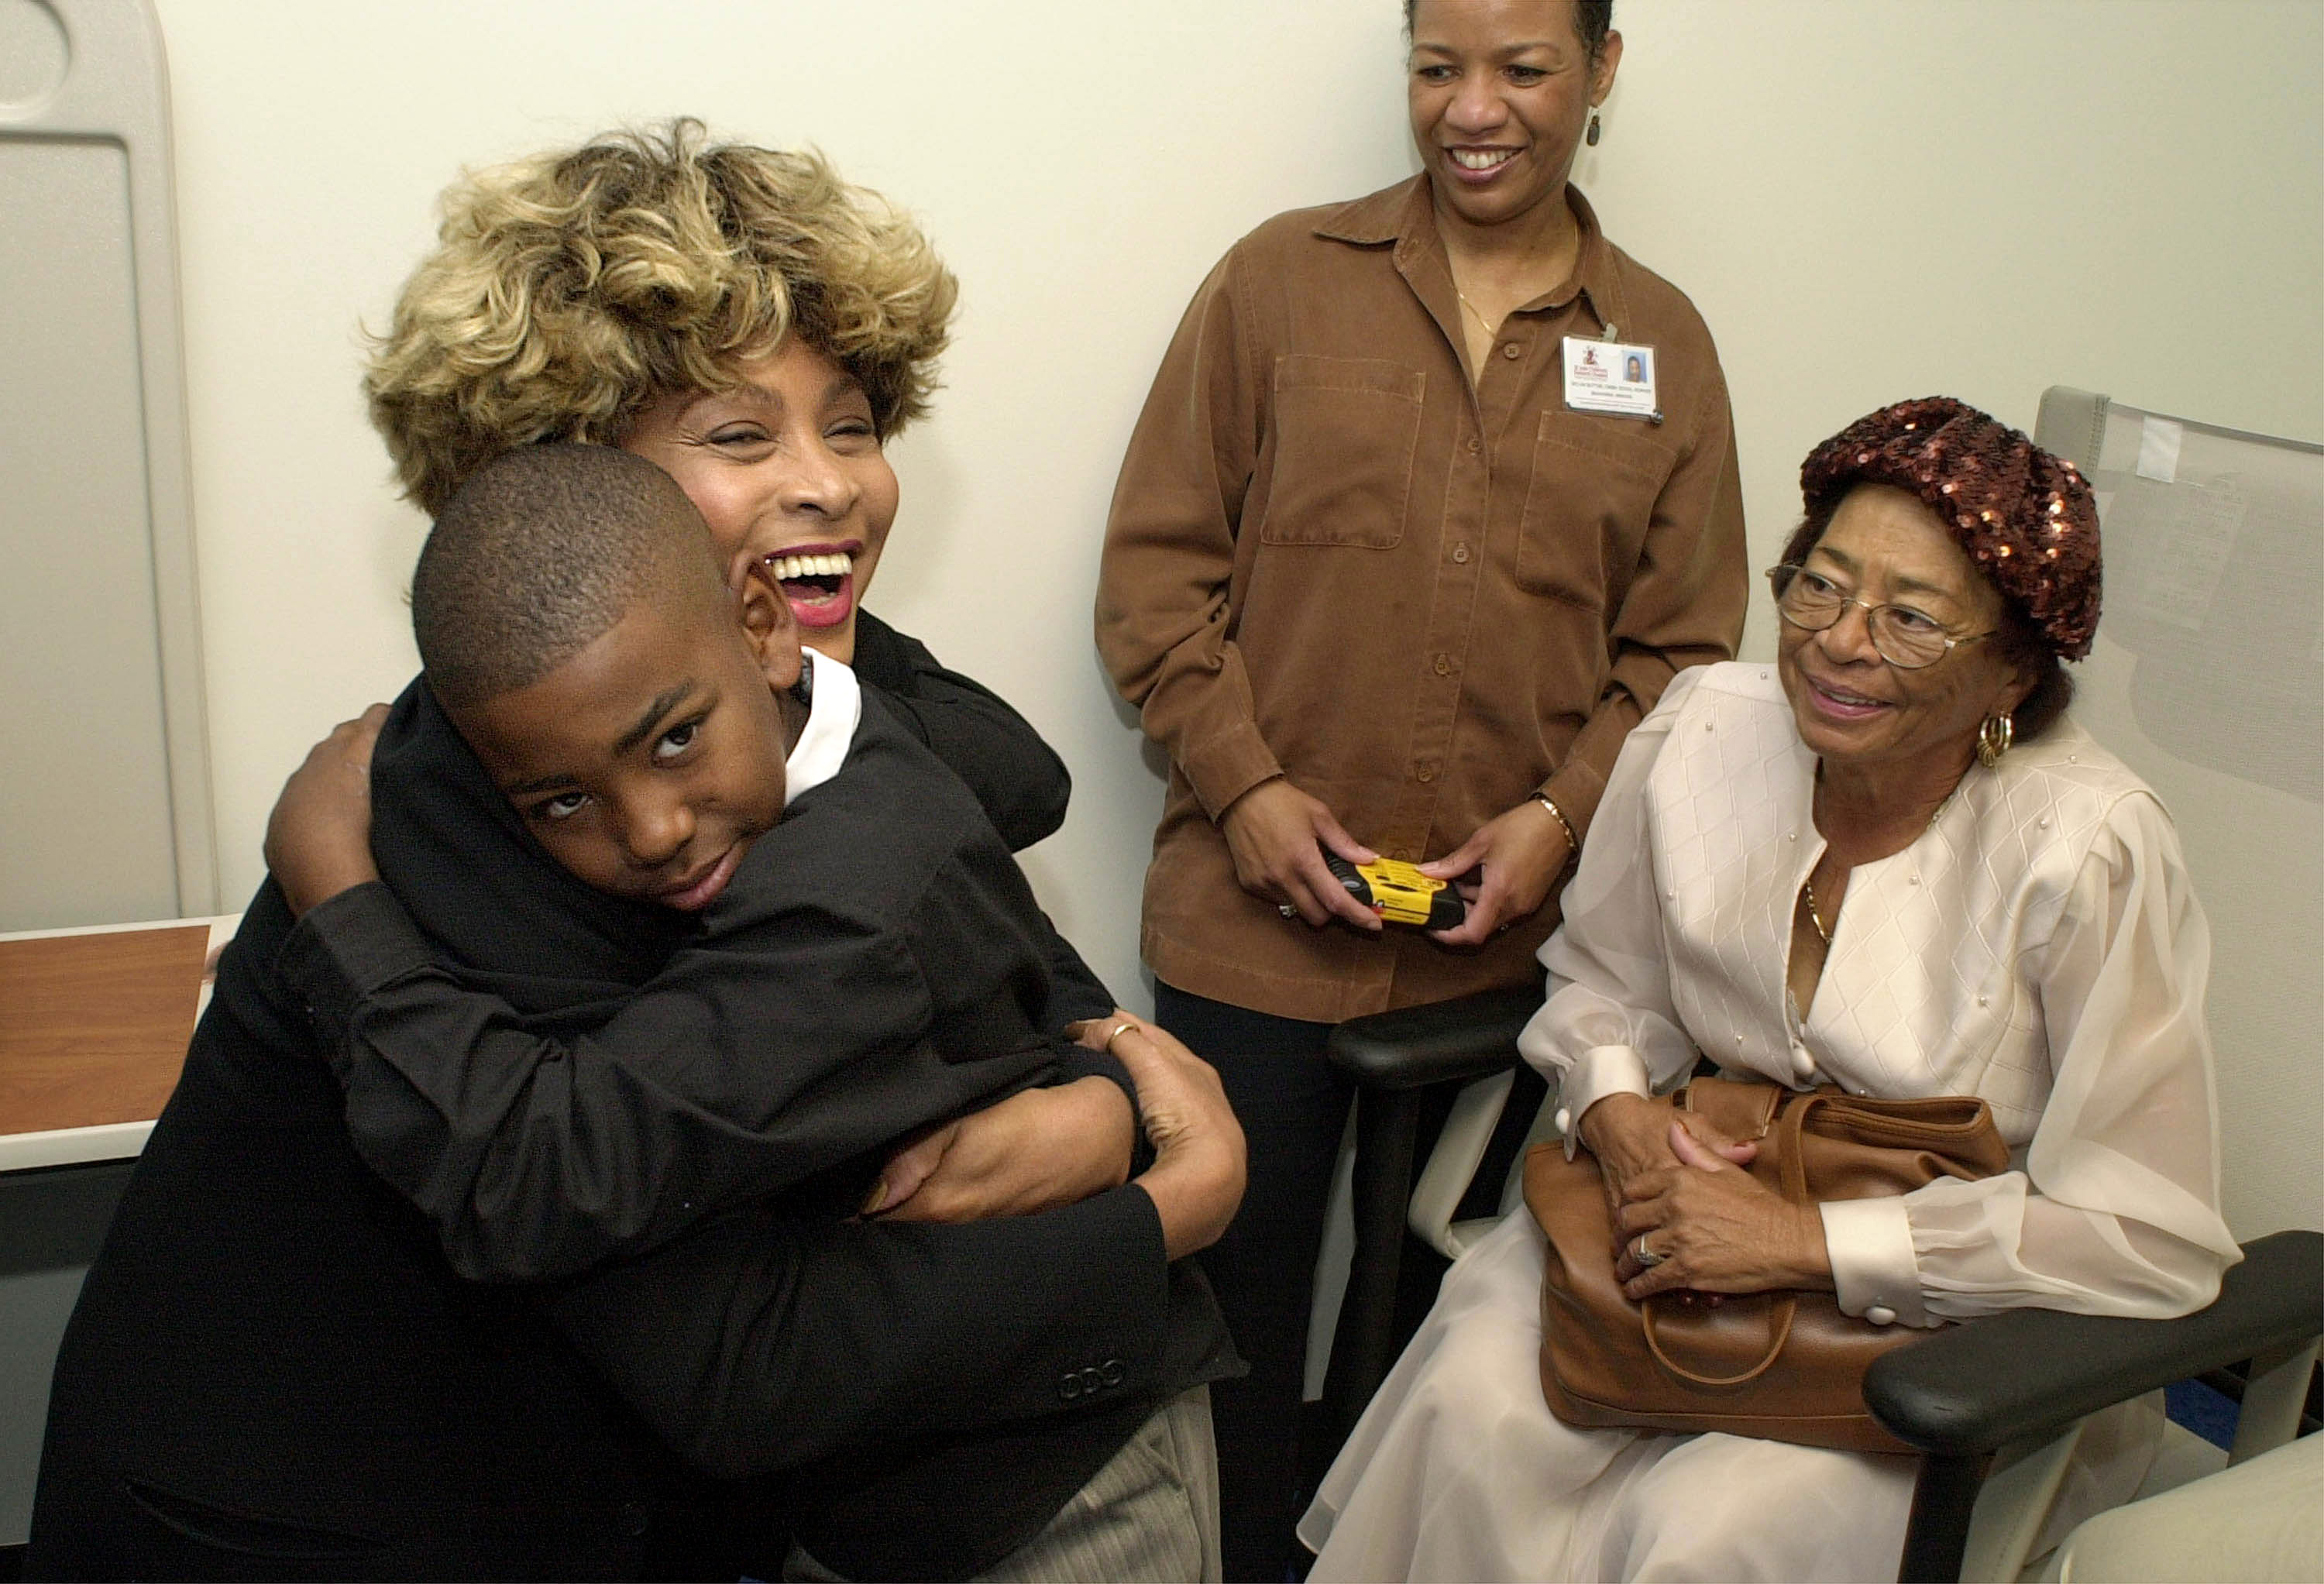 Tina Turner hugs Shawn Bell, 10, at St. Jude's Children's Research Hospital on Friday, Oct. 20, 2000 in Memphis, Tennessee. | Source: Getty Images